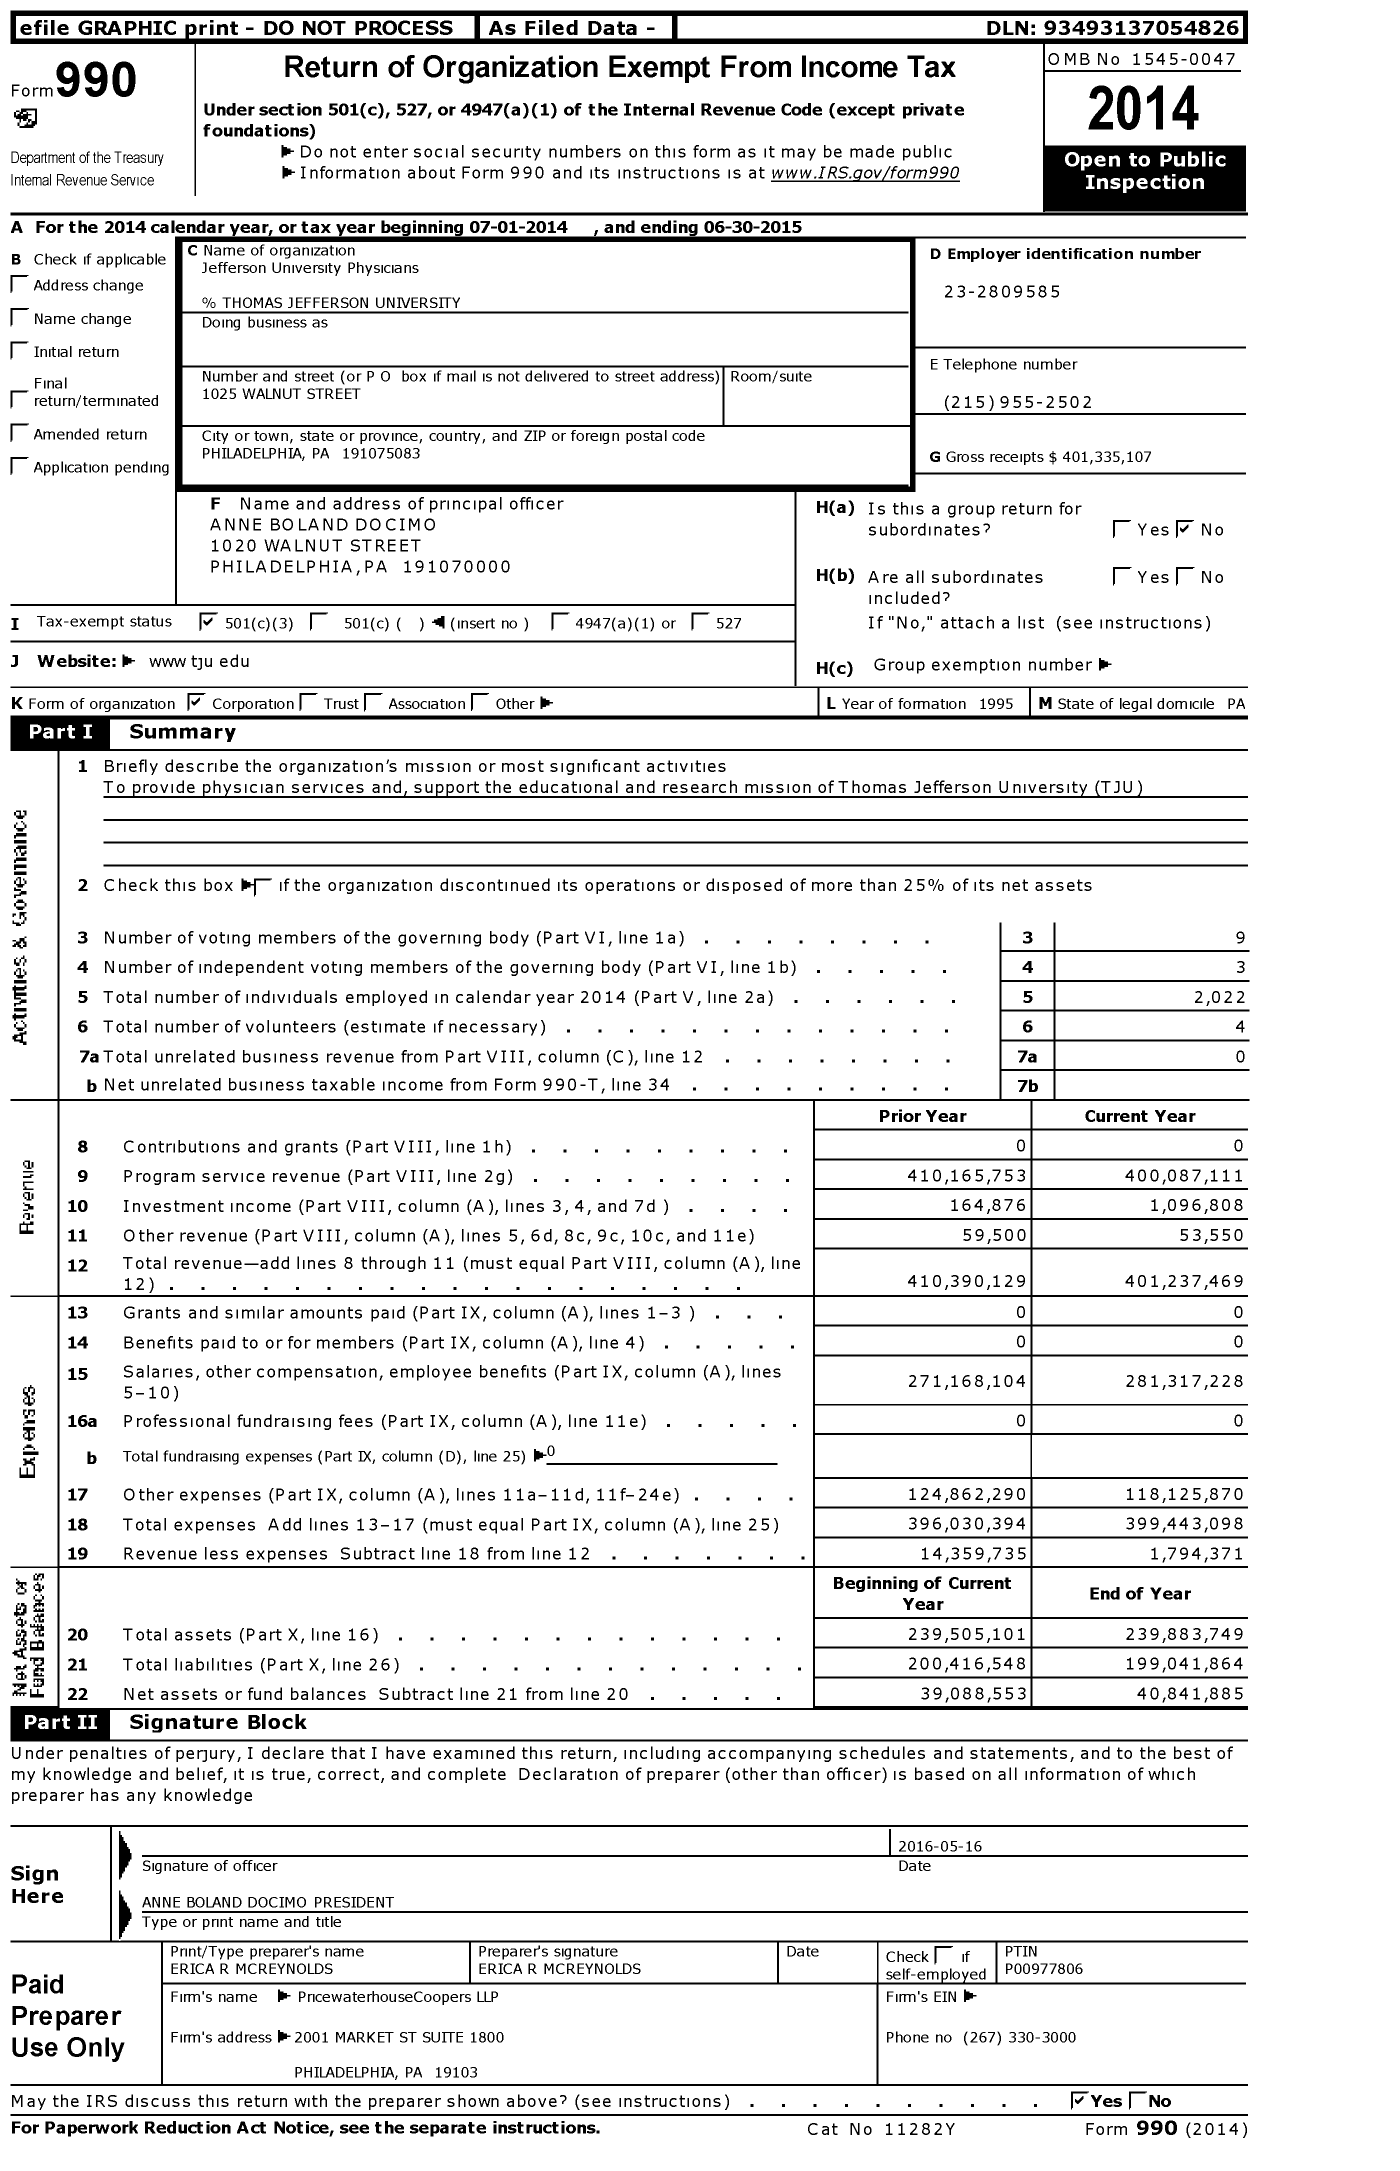 Image of first page of 2014 Form 990 for Jefferson University Physicians (JUP)